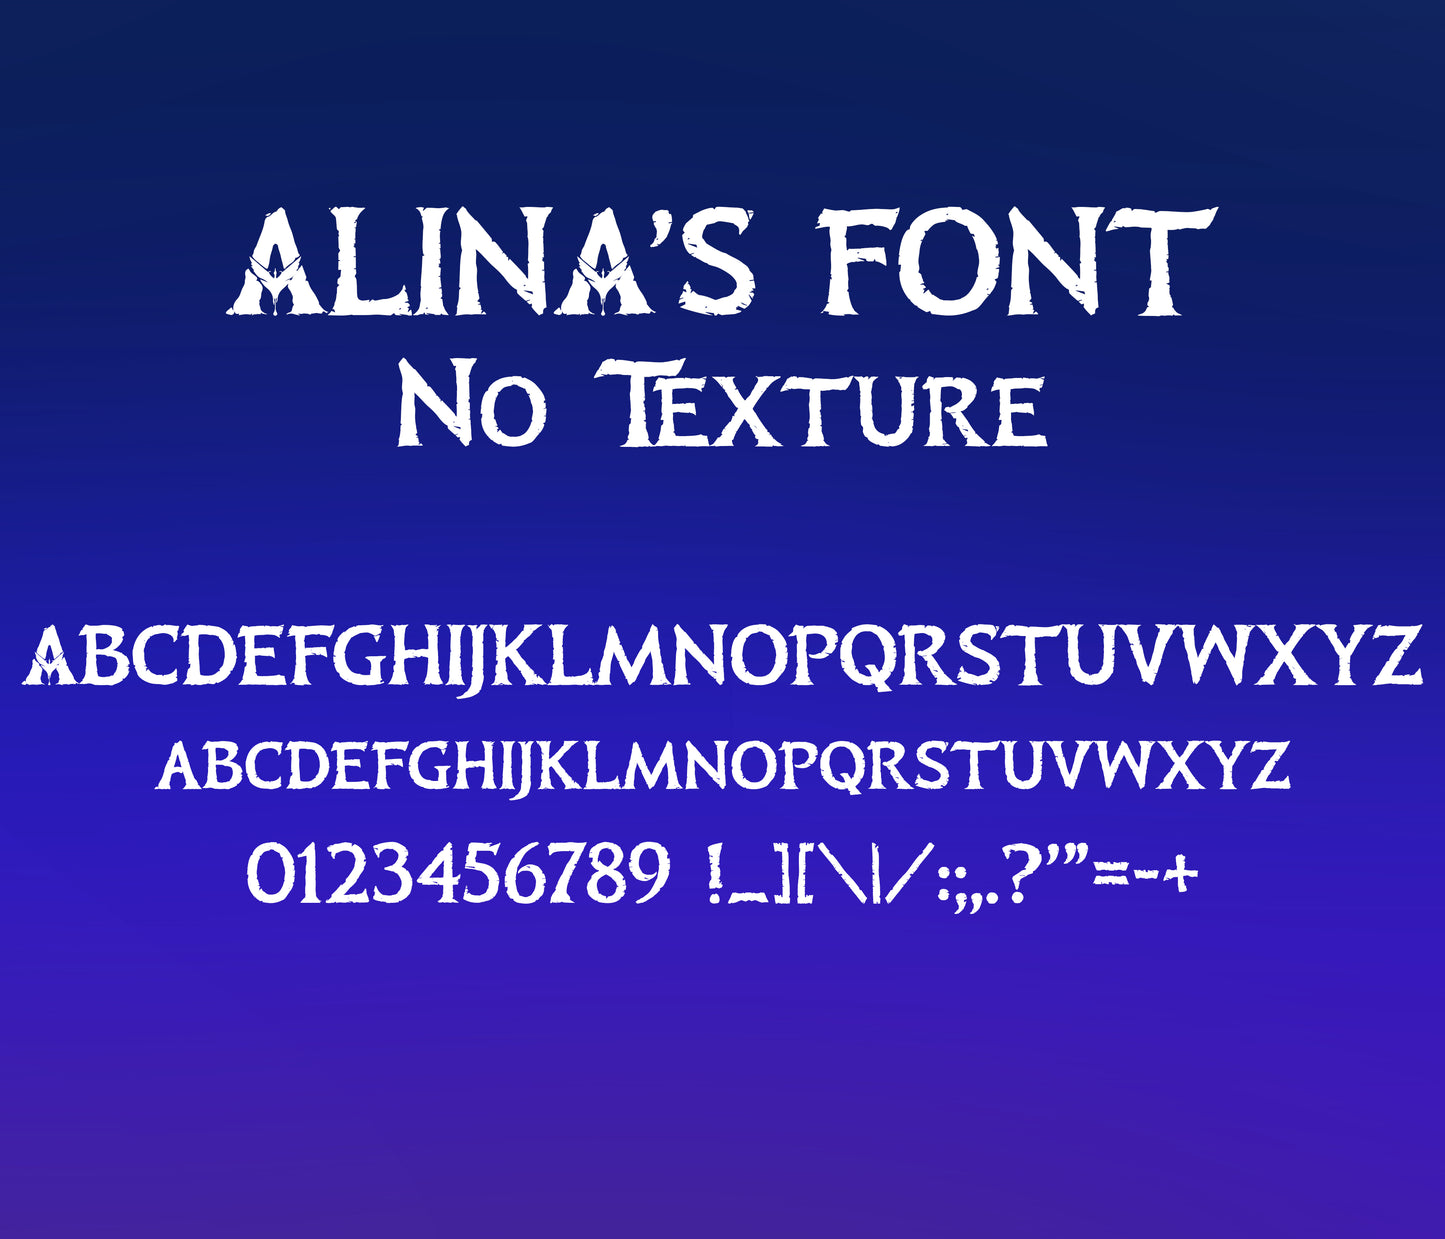 Avatar The Way Of Water Textured Font